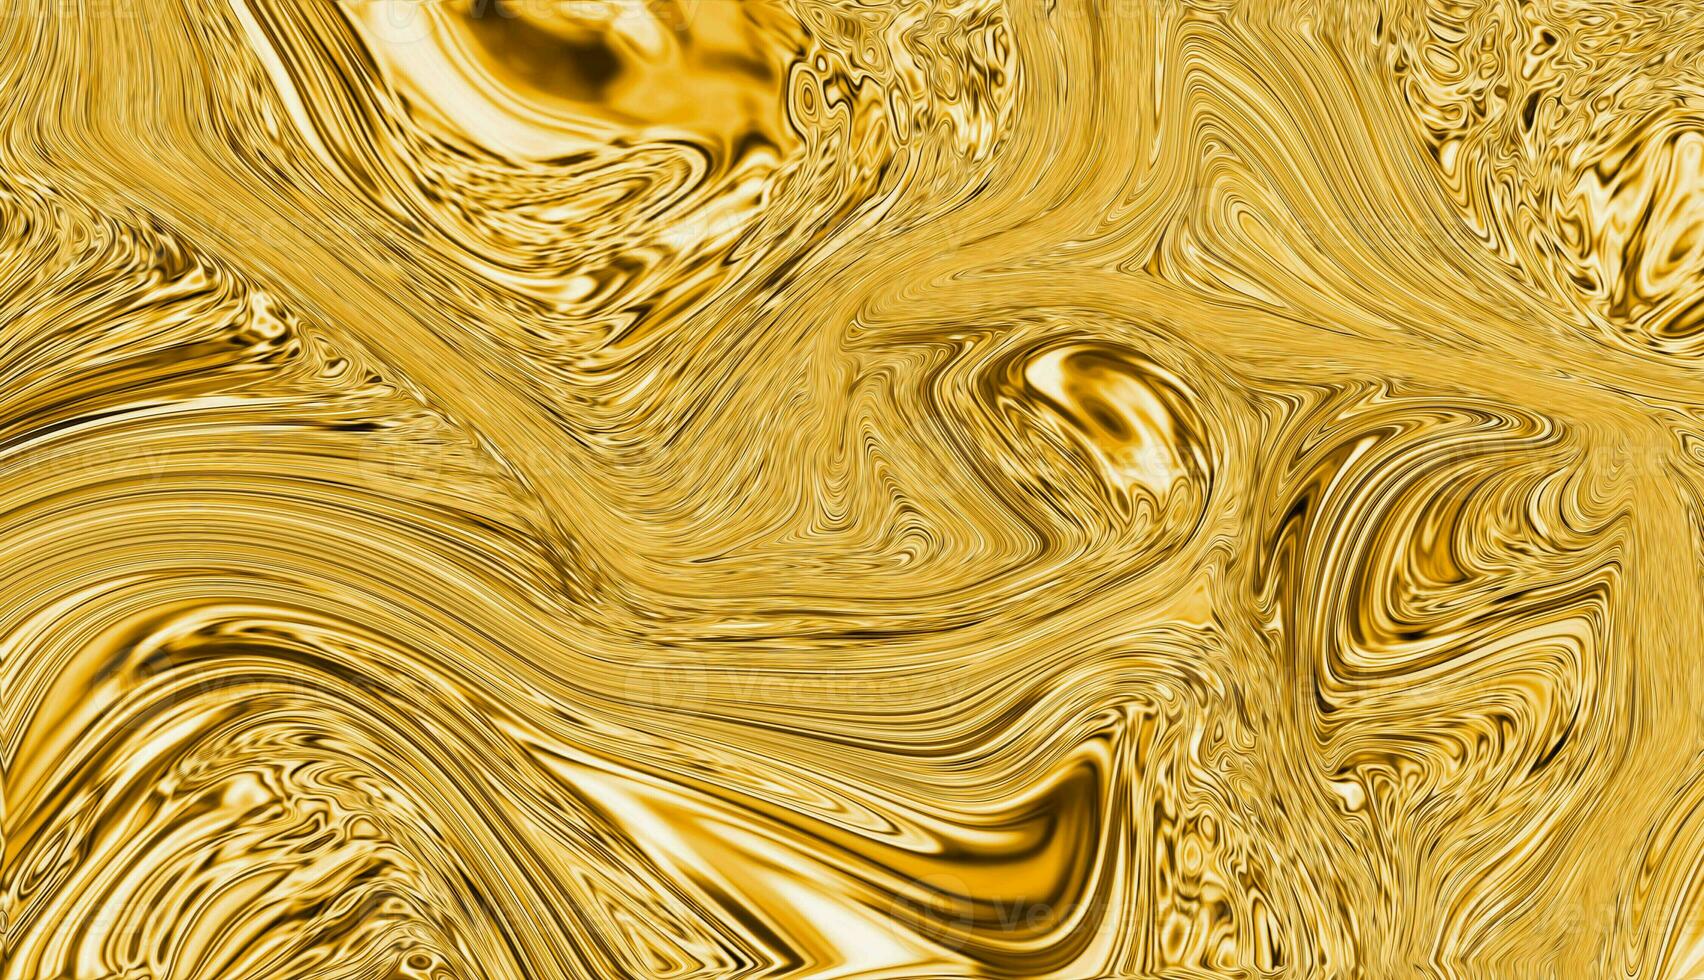 Precious metal flow image. Marble abstract background digital illustration. Liquid gold surface artwork. 3d illustration photo